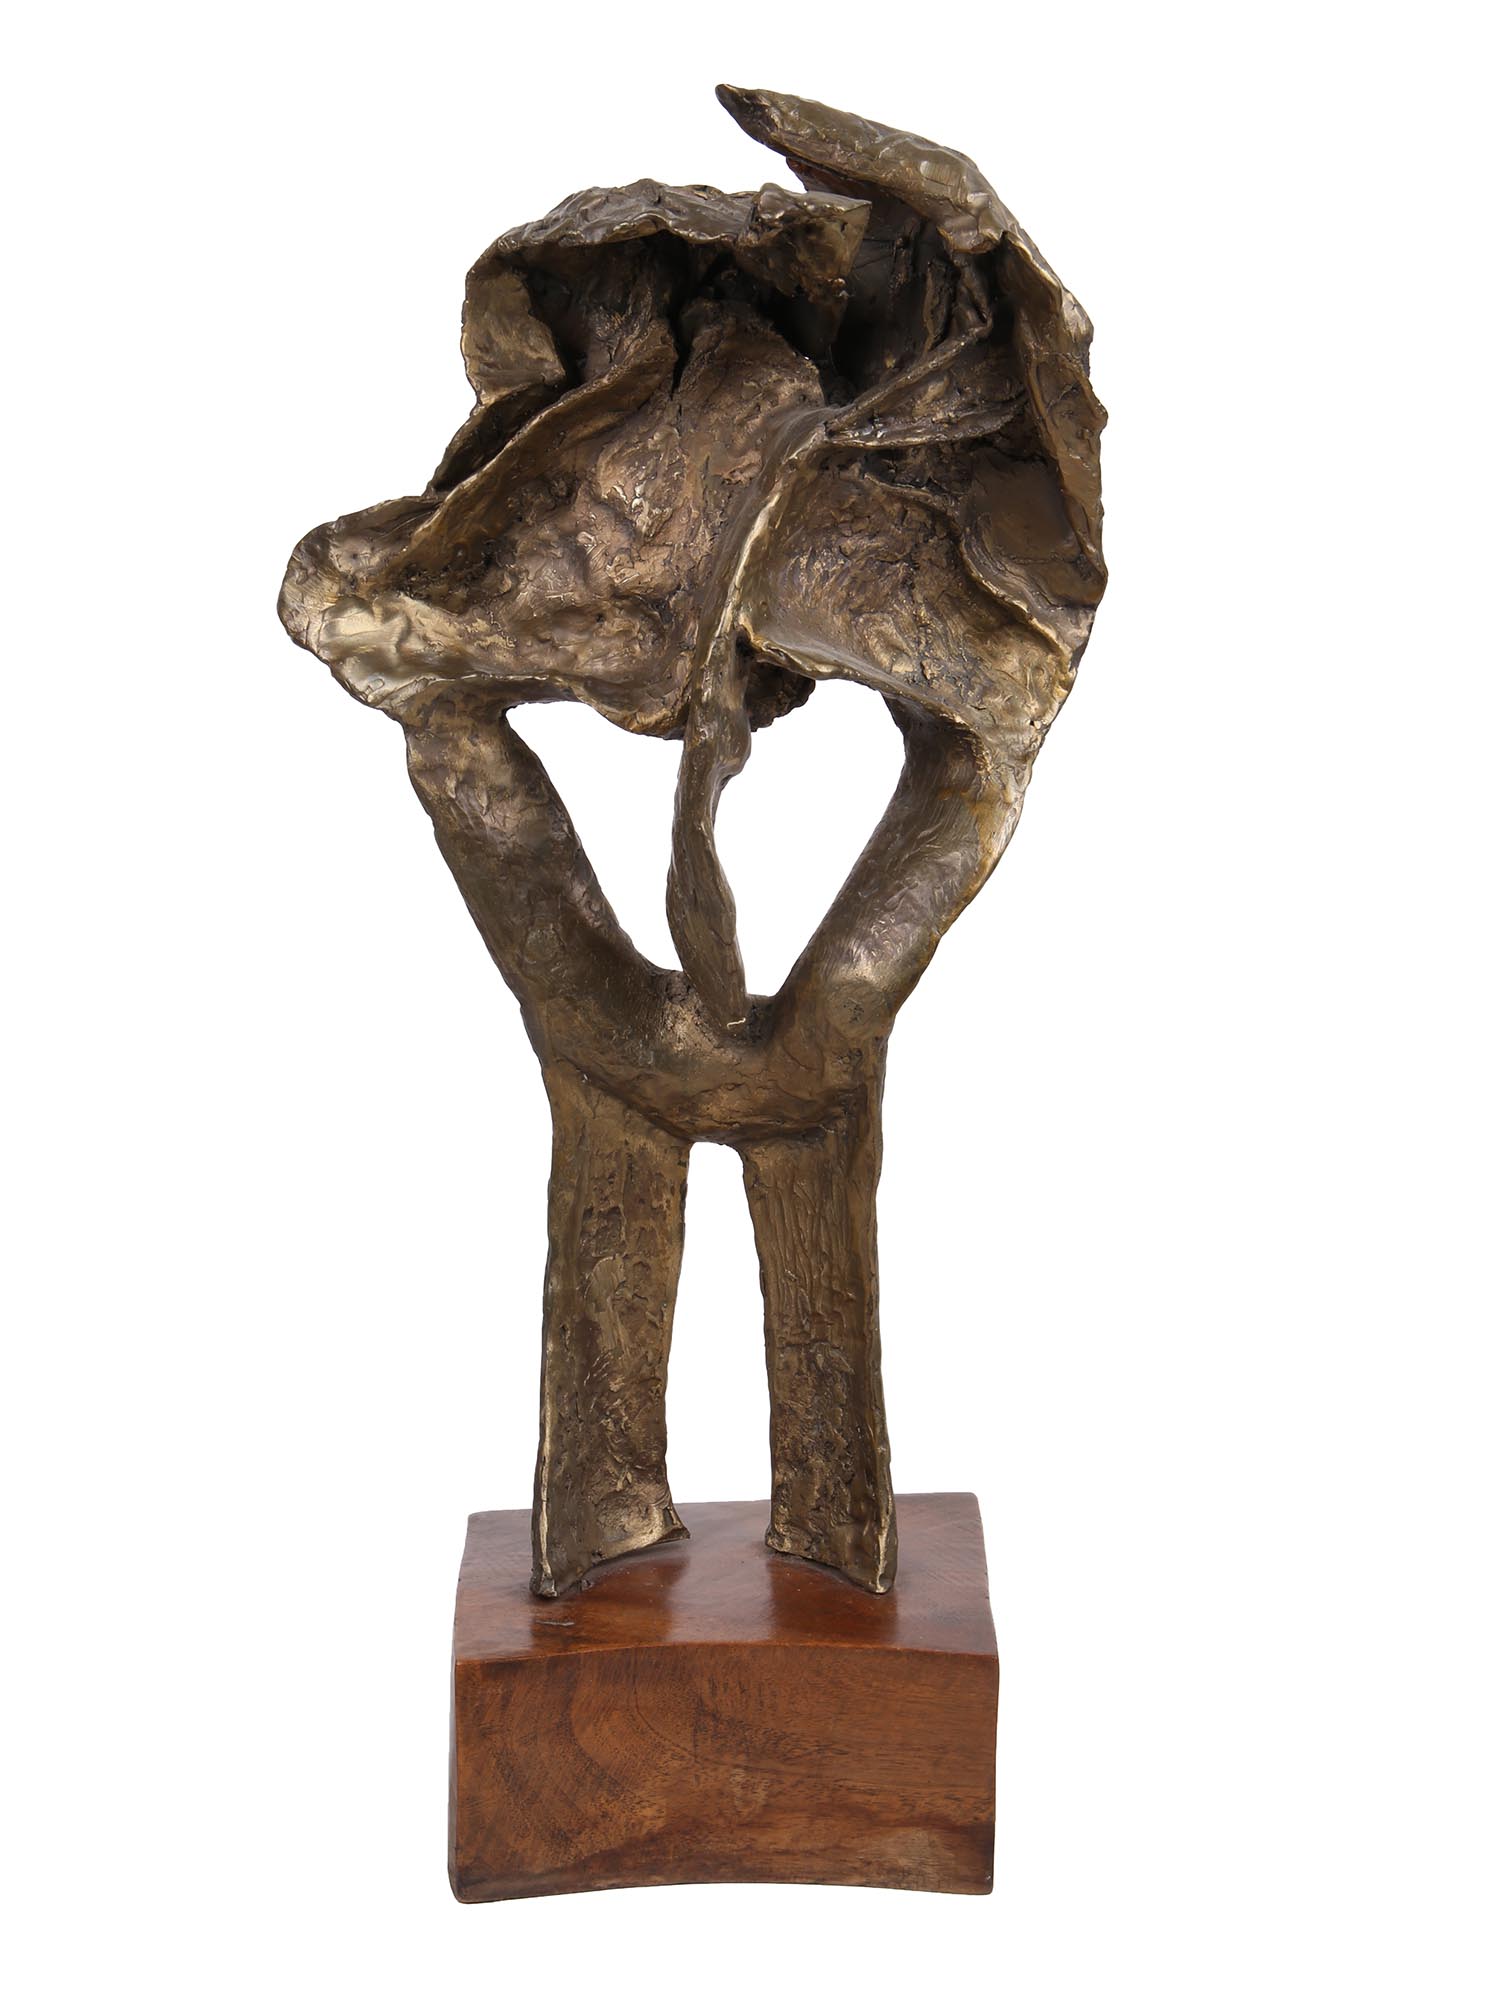 AMERICAN ABSTRACT BRONZE SCULPTURE BY ABRAMOVITZ PIC-0